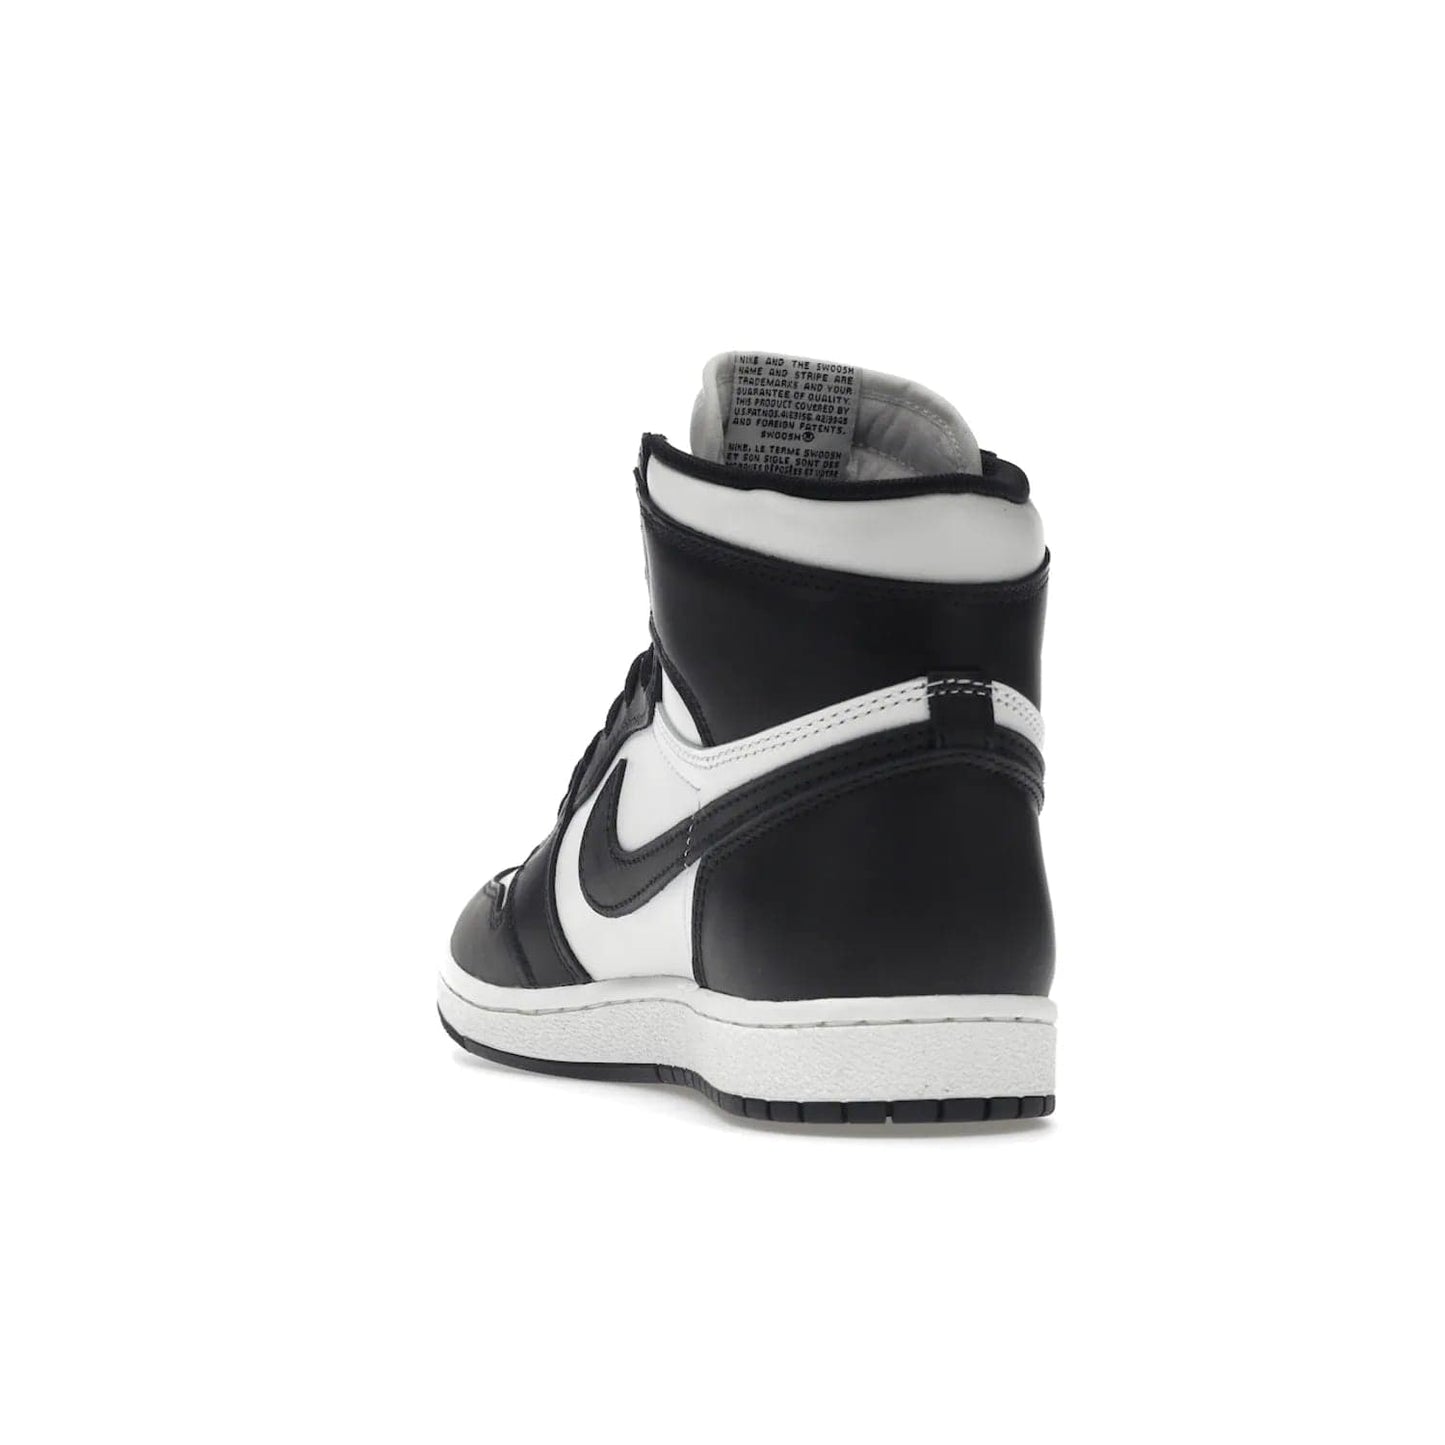 Jordan 1 Retro High 85 Black White (2023) - Image 26 - Only at www.BallersClubKickz.com - Brand new Jordan 1 Retro High 85 Black White (2023) now available. A classic color scheme of black and white leather uppers with signature Nike Air logo on the tongue. Must-have for any Air Jordan fan. Available February 15, 2023.